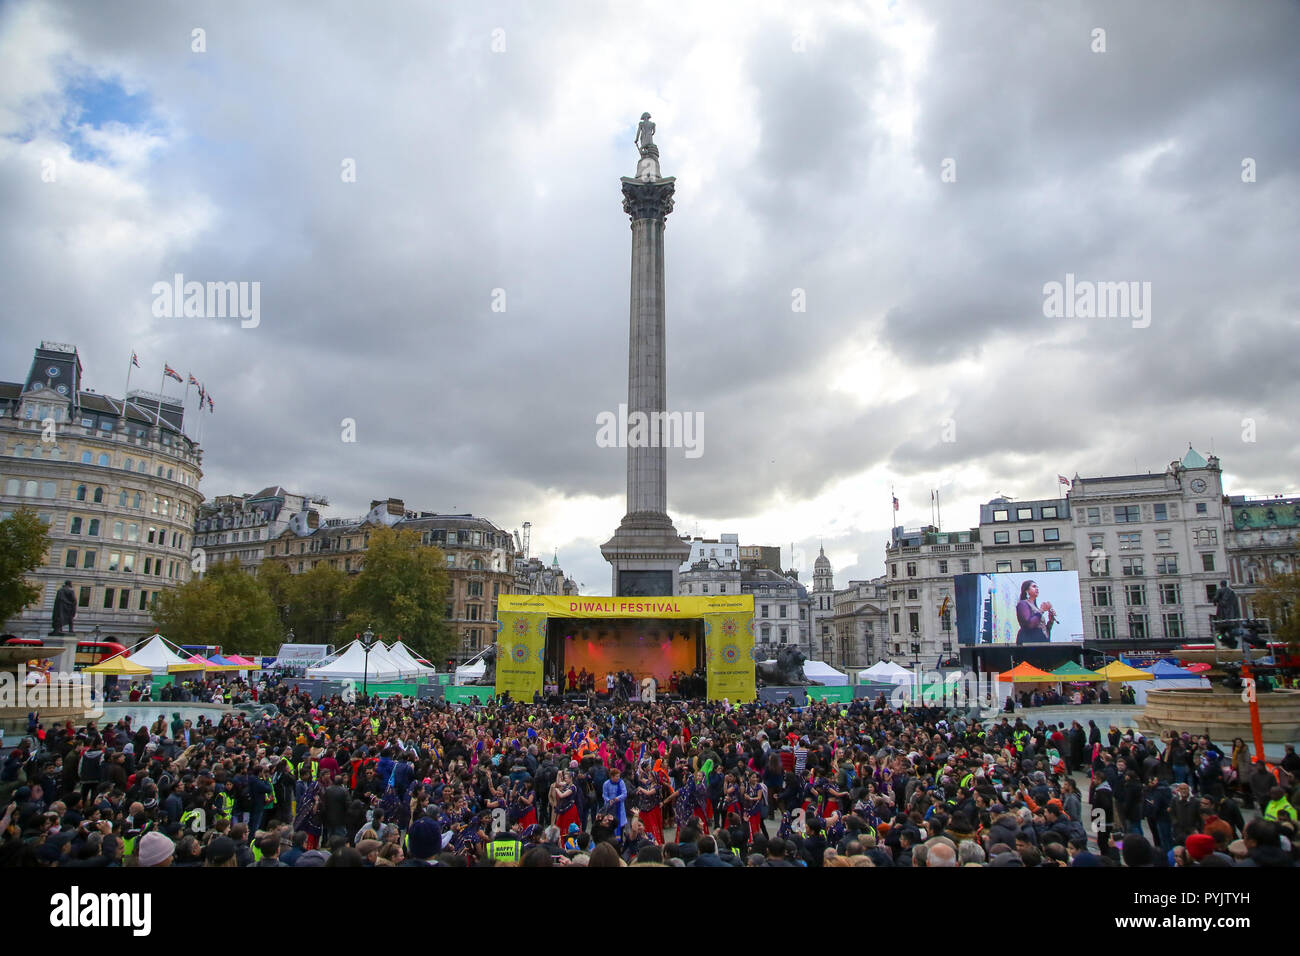 Trafalgar Square, London, UK. 28 Oct 2018 - Members of public joins the performers during the Mass Ghoomar Dance - a traditional Gujarati folk dance of the Bhil tribe performed in worship to Goddess Sarasvati, were the dancers twirling in and out of a wide circle.   Hundreds of Hindus, Sikhs, Jains and people from all communities attend Diwali celebrations in London - festival of light, Diwali in London is celebrated each year with a free concert of traditional religious and contemporary Asian music and dance.  Credit: Dinendra Haria/Alamy Live News Stock Photo